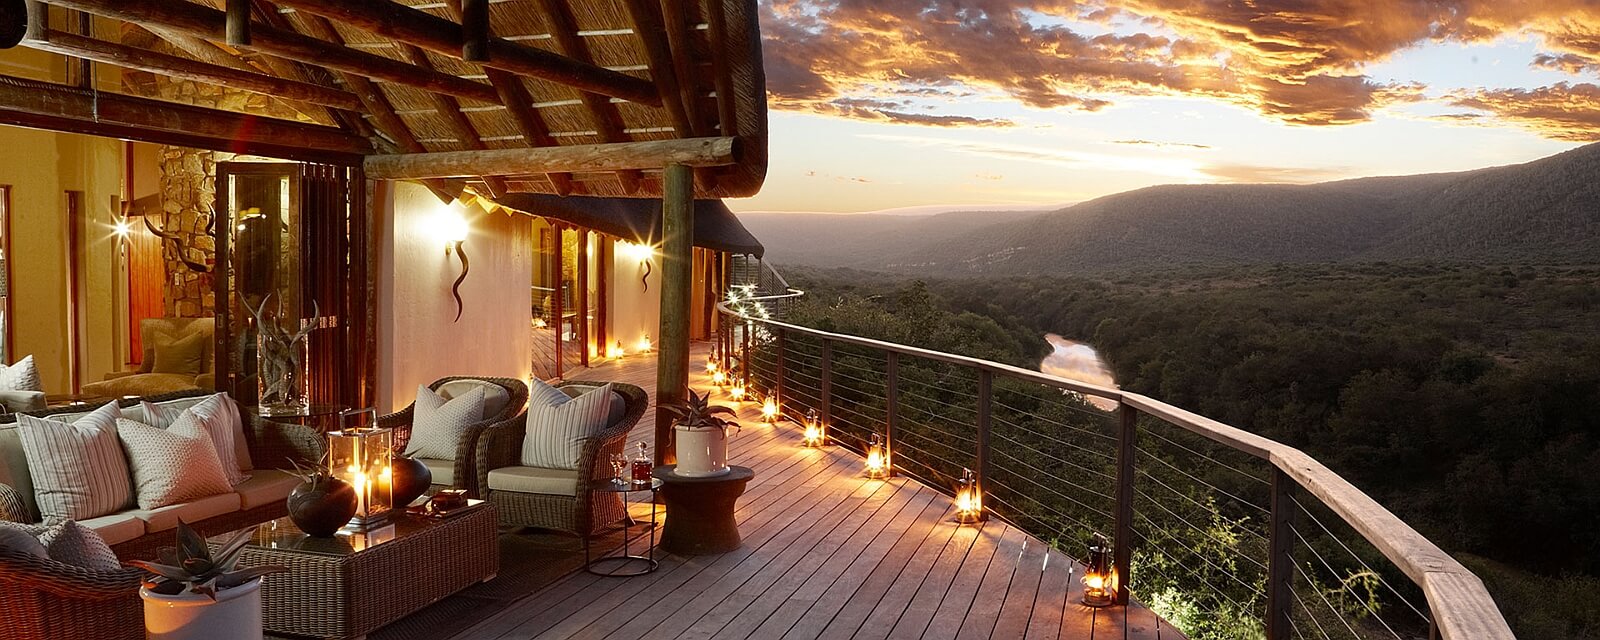 South Africa Kwandwe Private Game Reserve Great Fish River Lodge 2. Kwandwe Great Fish River Lodge Main Deck 1